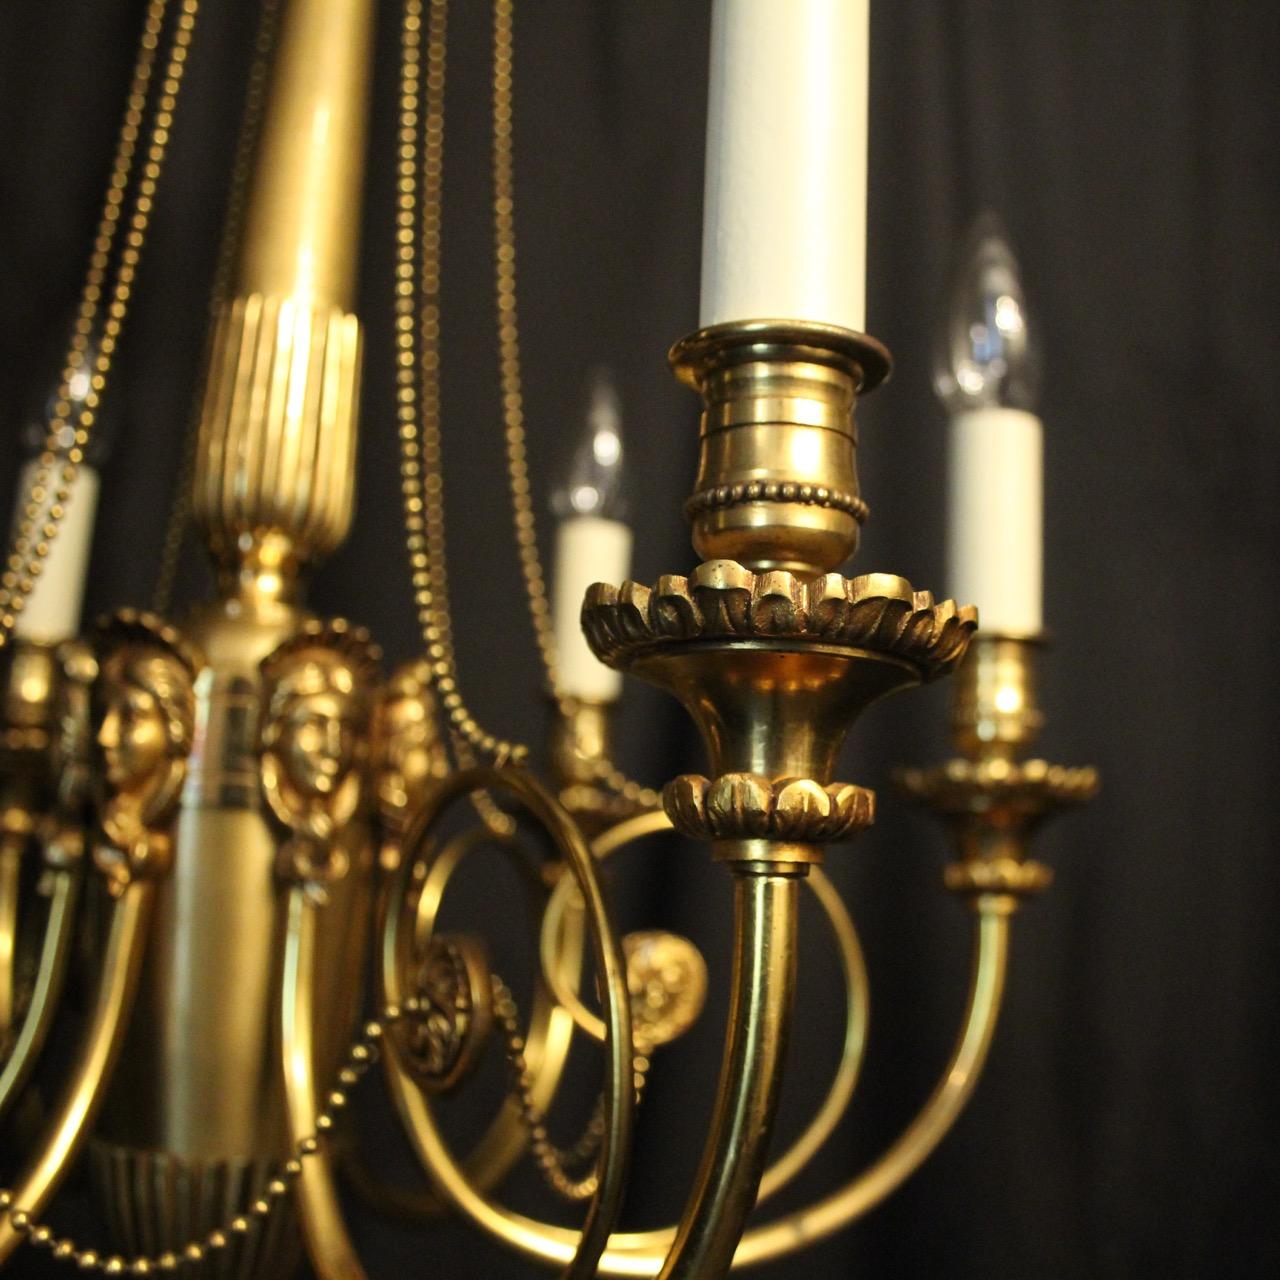 pair of antique chandeliers